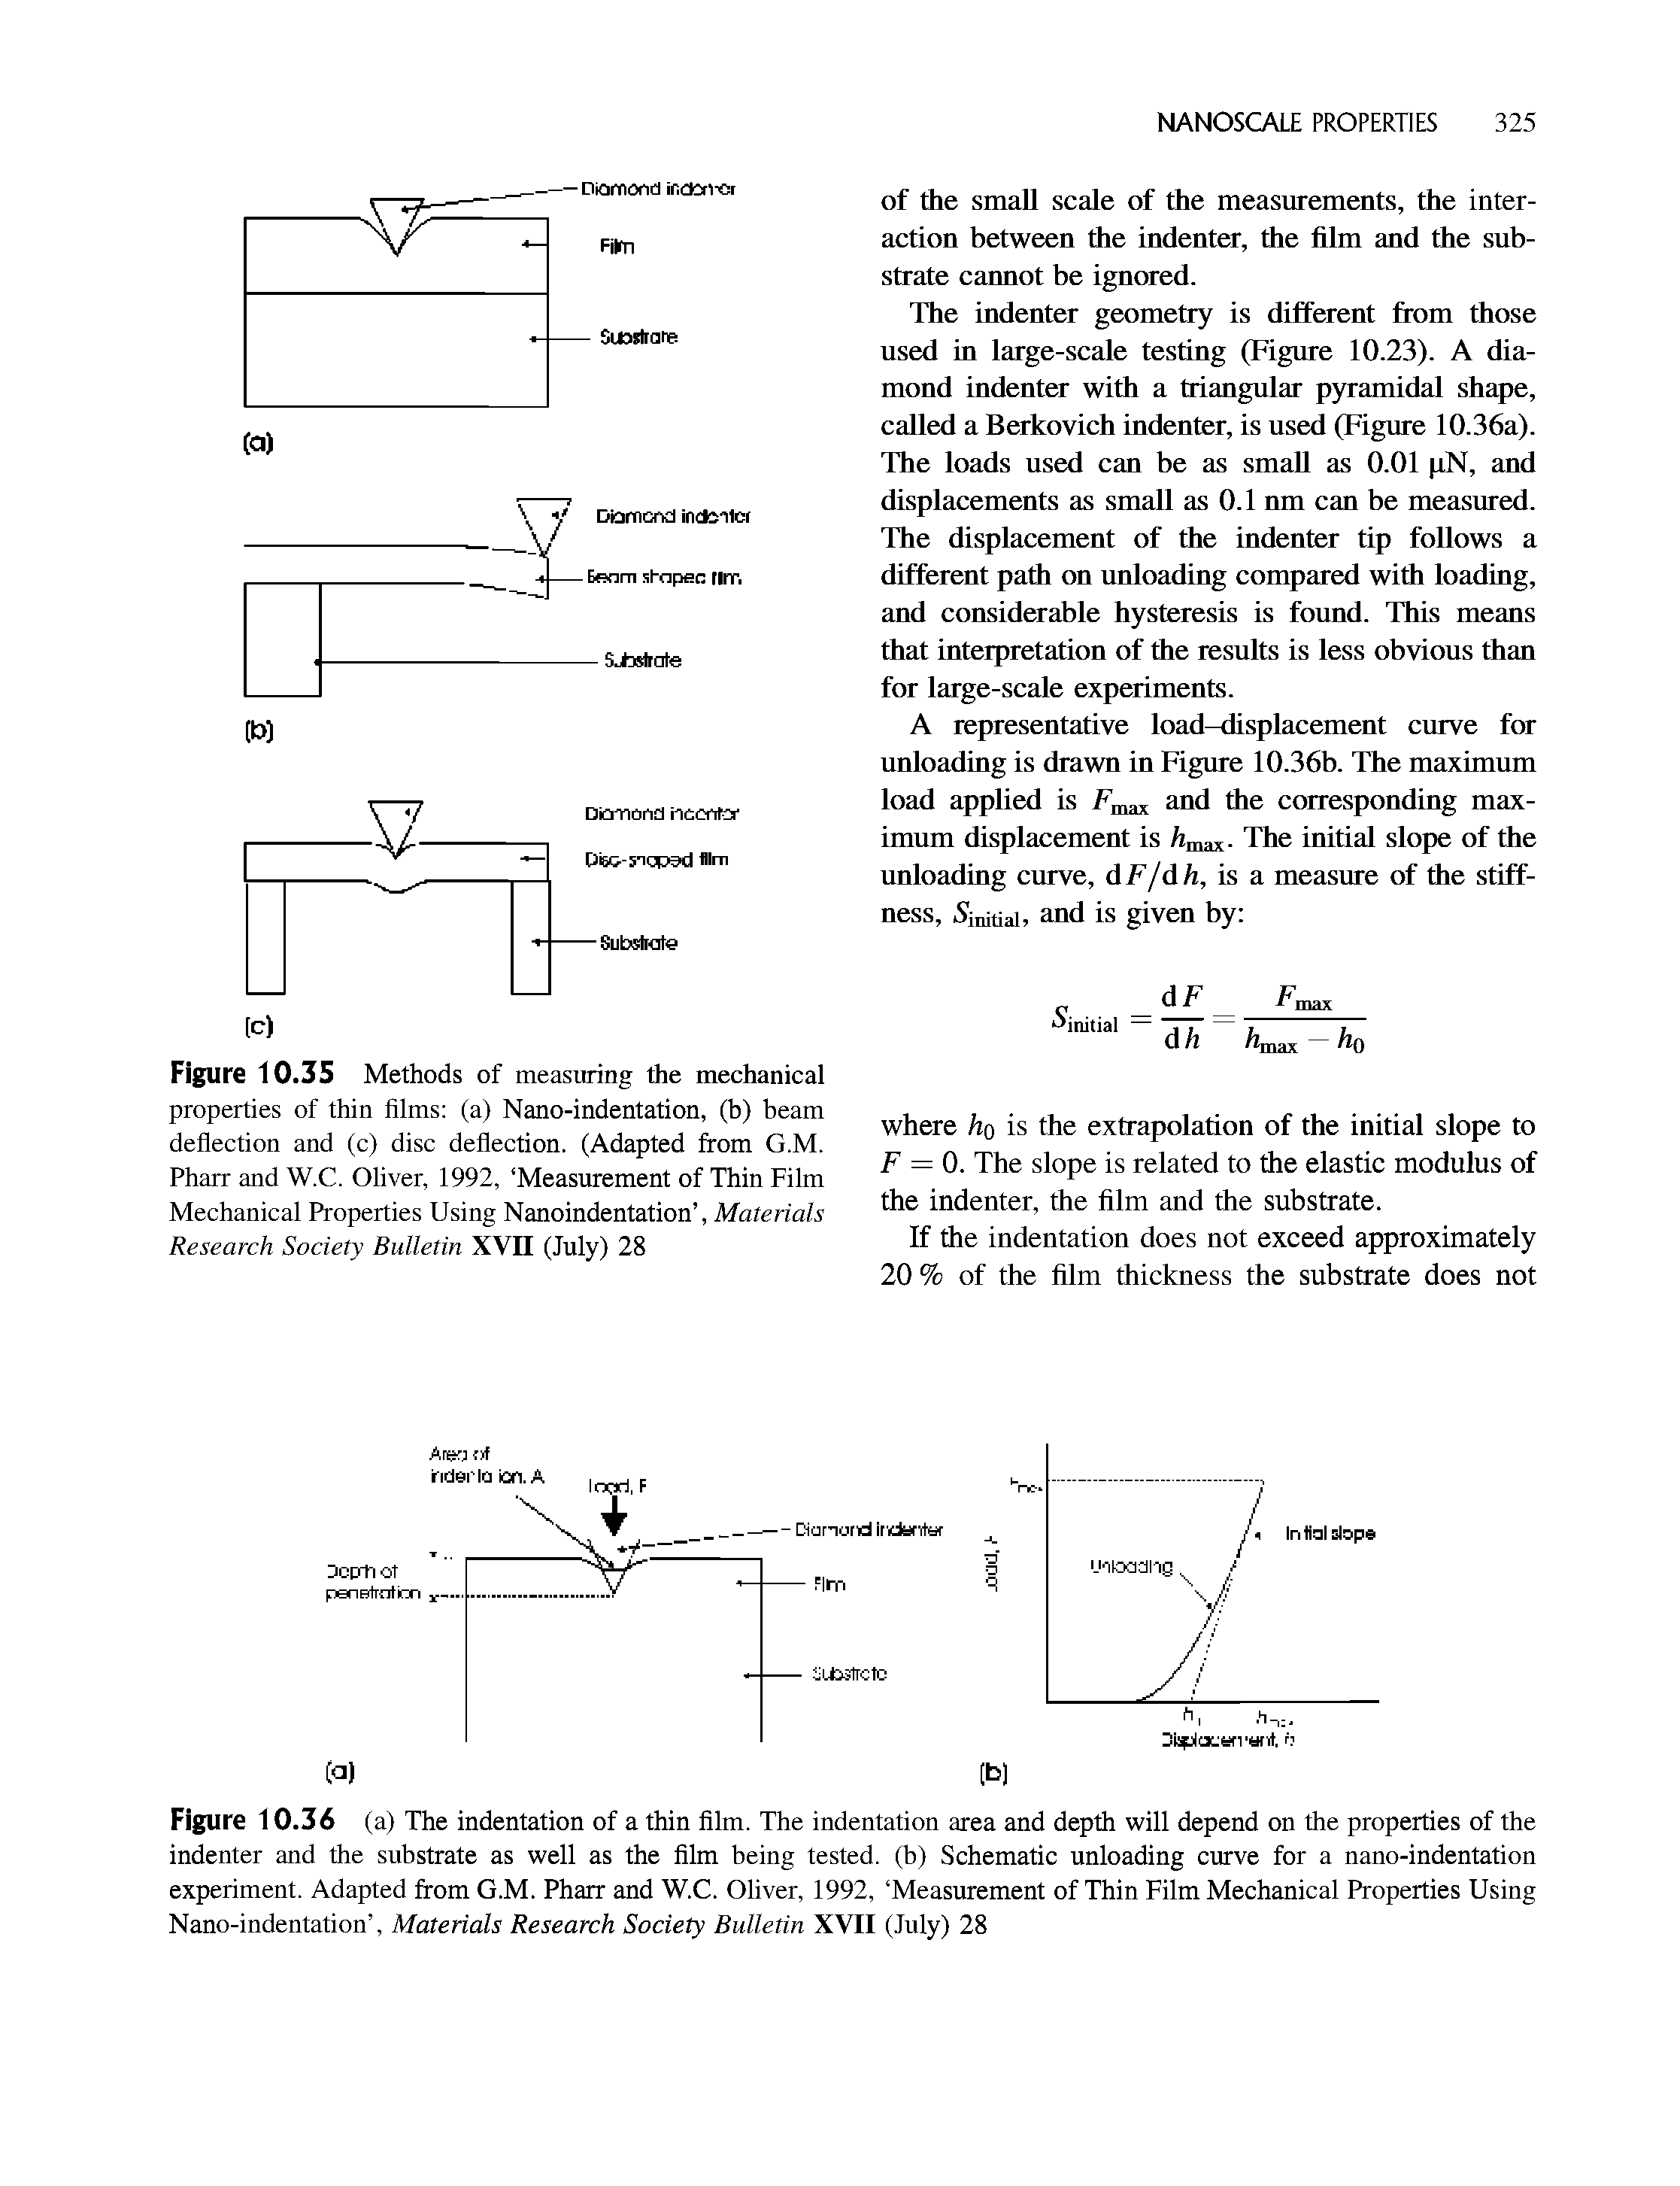 Figure 10.35 Methods of measuring the mechanical properties of thin films (a) Nano-indentation, (b) beam deflection and (c) disc deflection. (Adapted from G.M. Pharr and W.C. Oliver, 1992, Measurement of Thin Film Mechanical Properties Using Nanoindentation , Materials Research Society Bulletin XVII (July) 28...